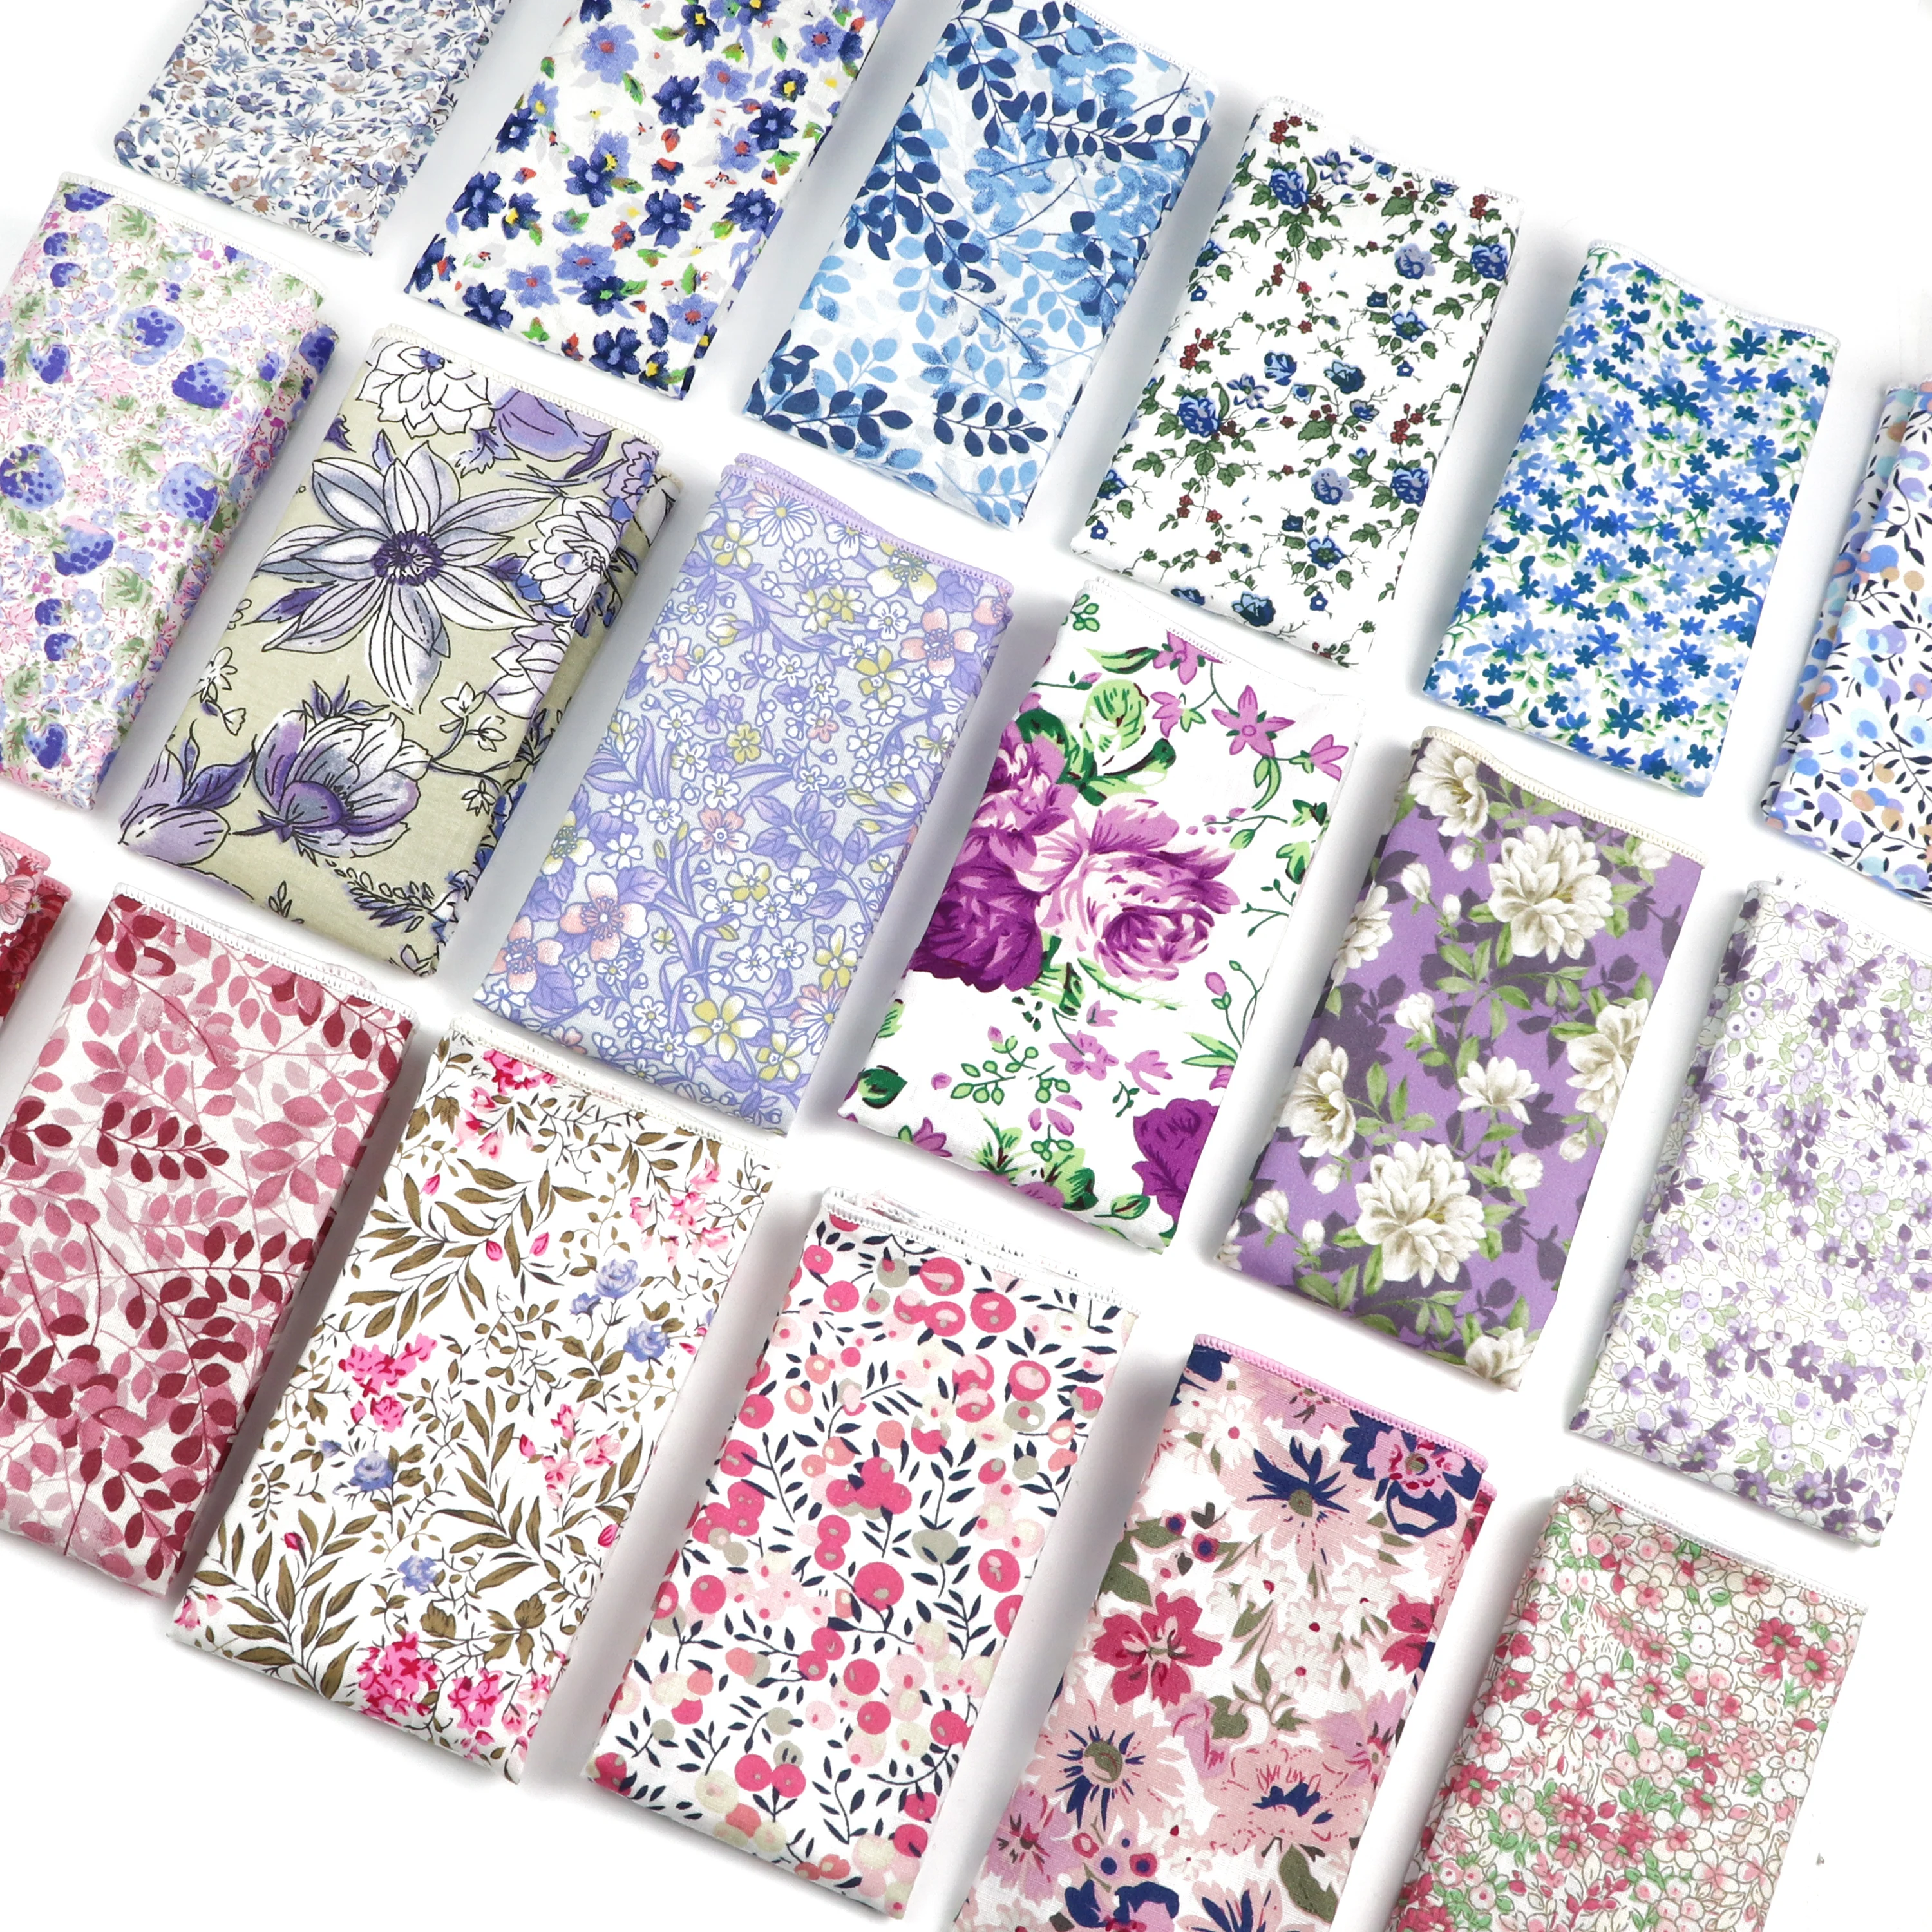 

New Beautiful Floral Print Hankerchief 100% Cotton Pink Blue Purple Hankies For Men Wedding Party Daily Wear Accessories Gift